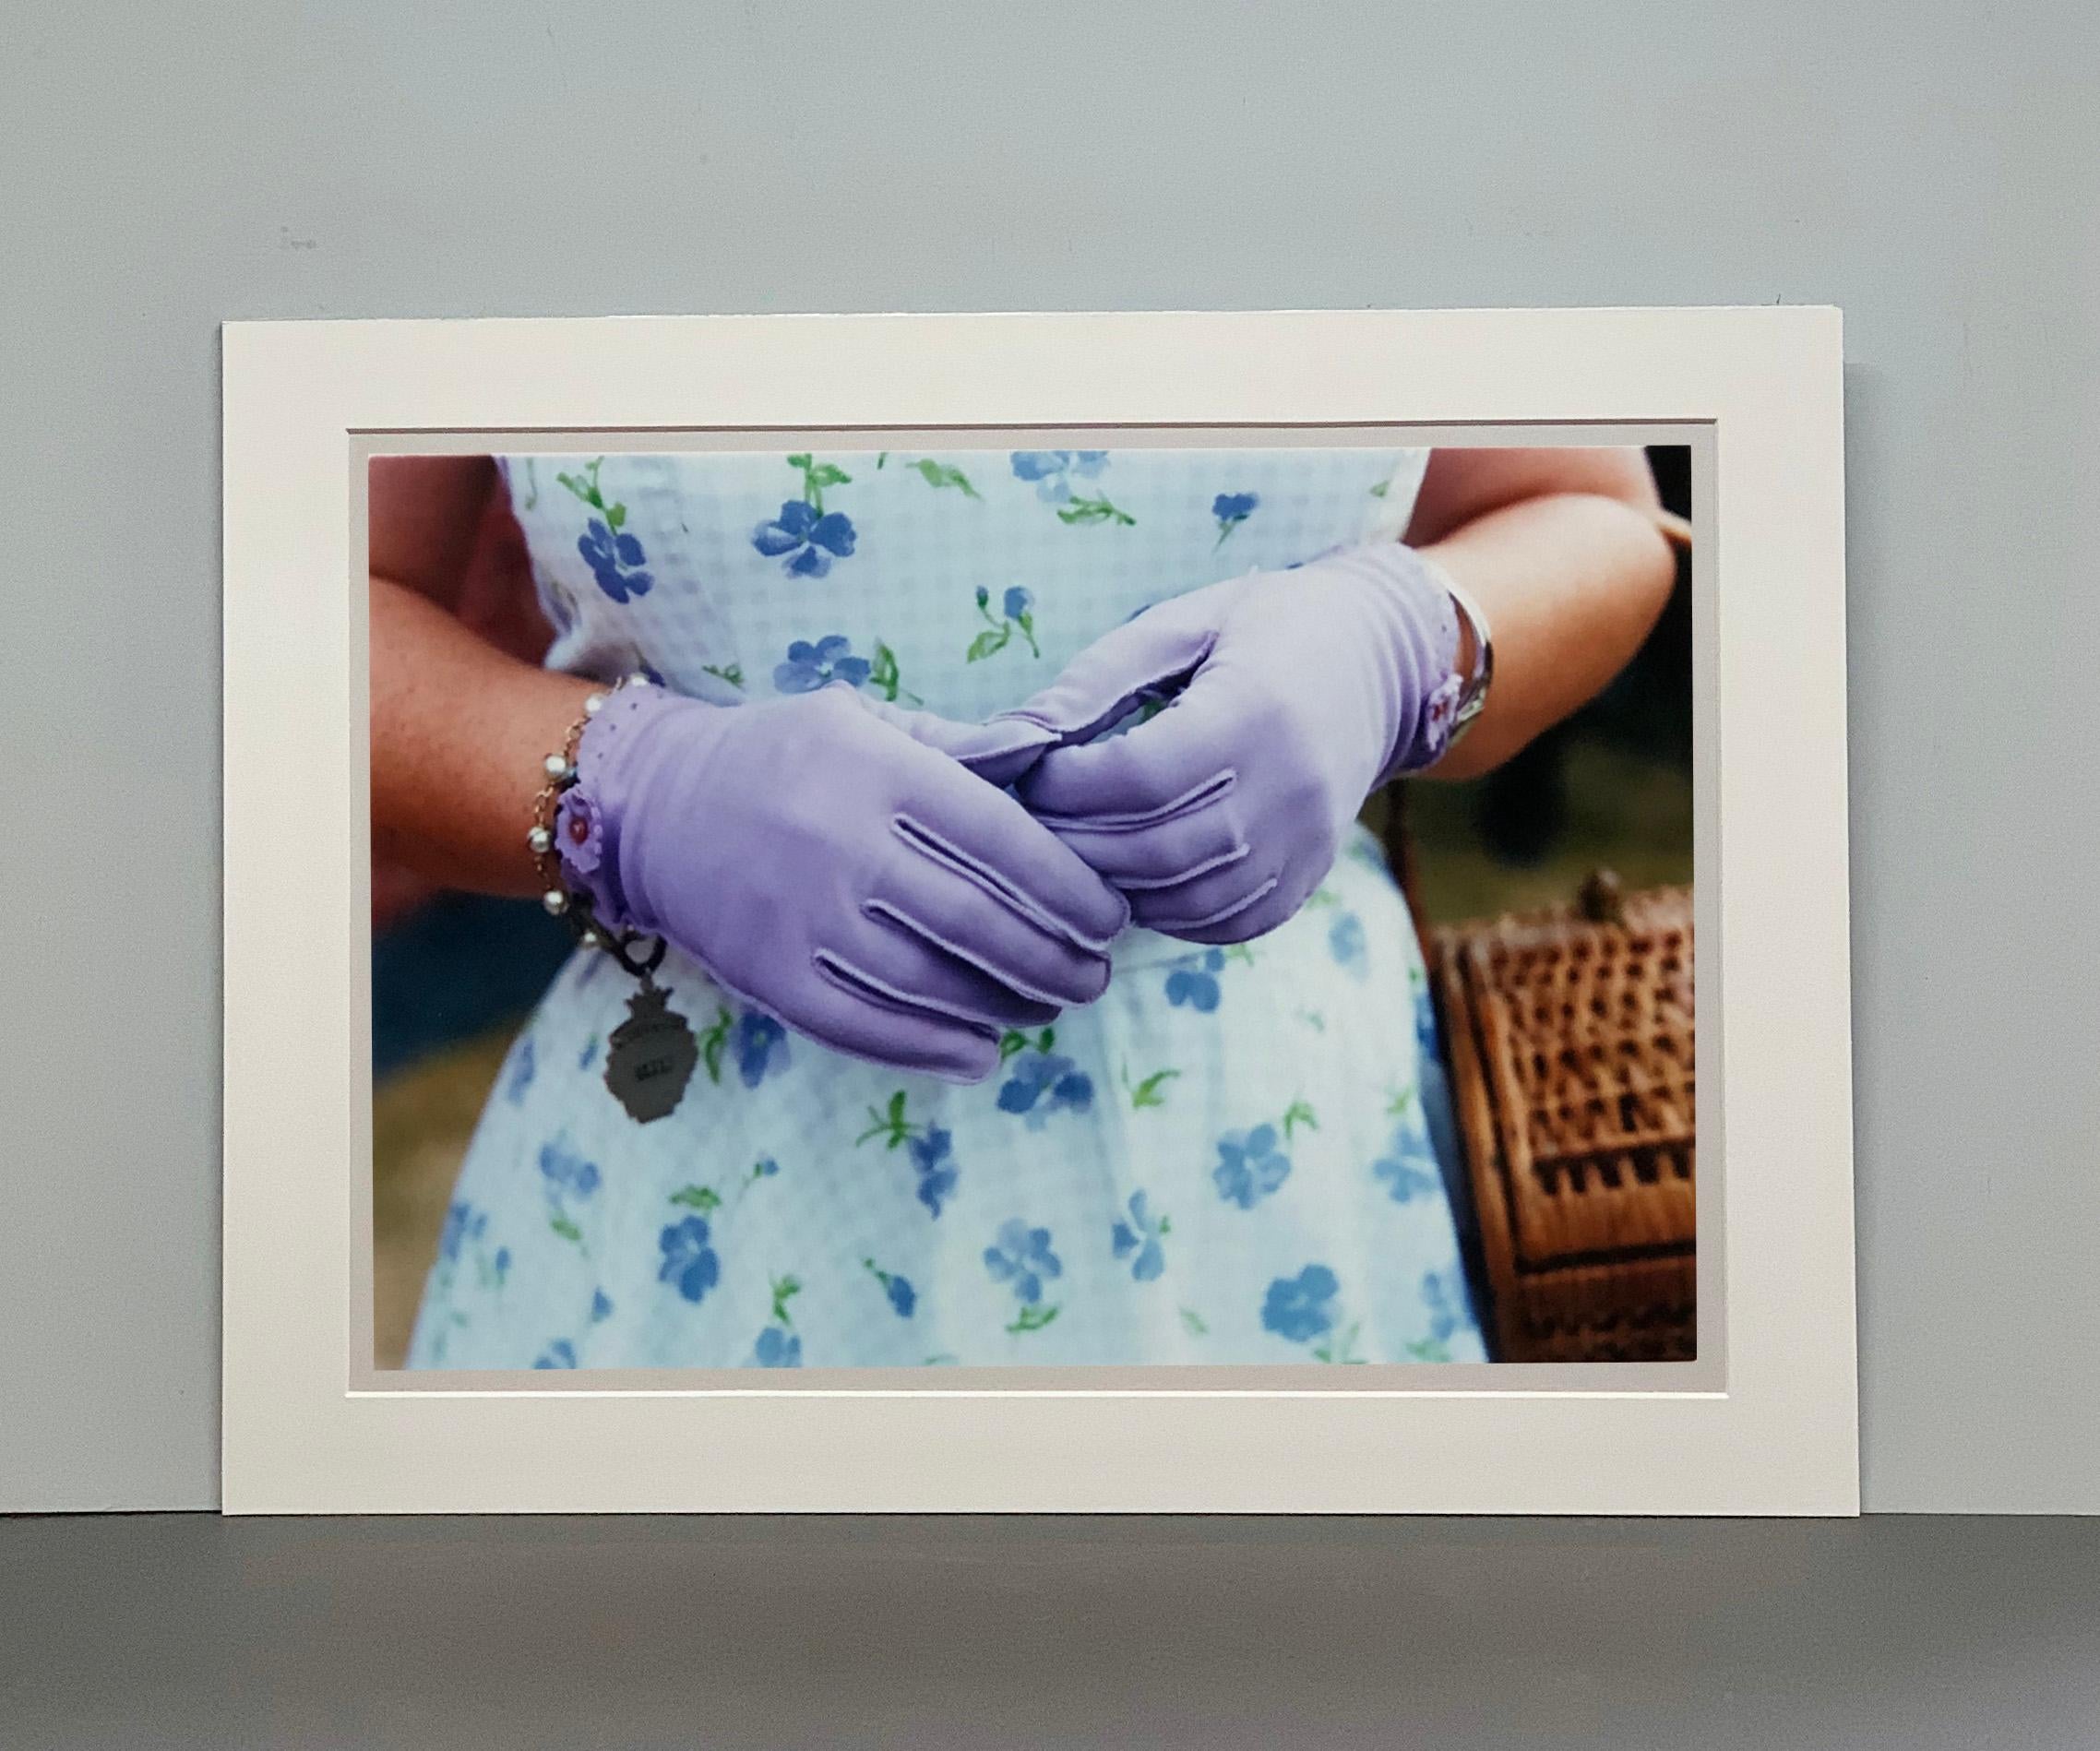 Lilac Gloves, Goodwood, Chichester - Feminine fashion, color photography - Gray Figurative Photograph by Richard Heeps